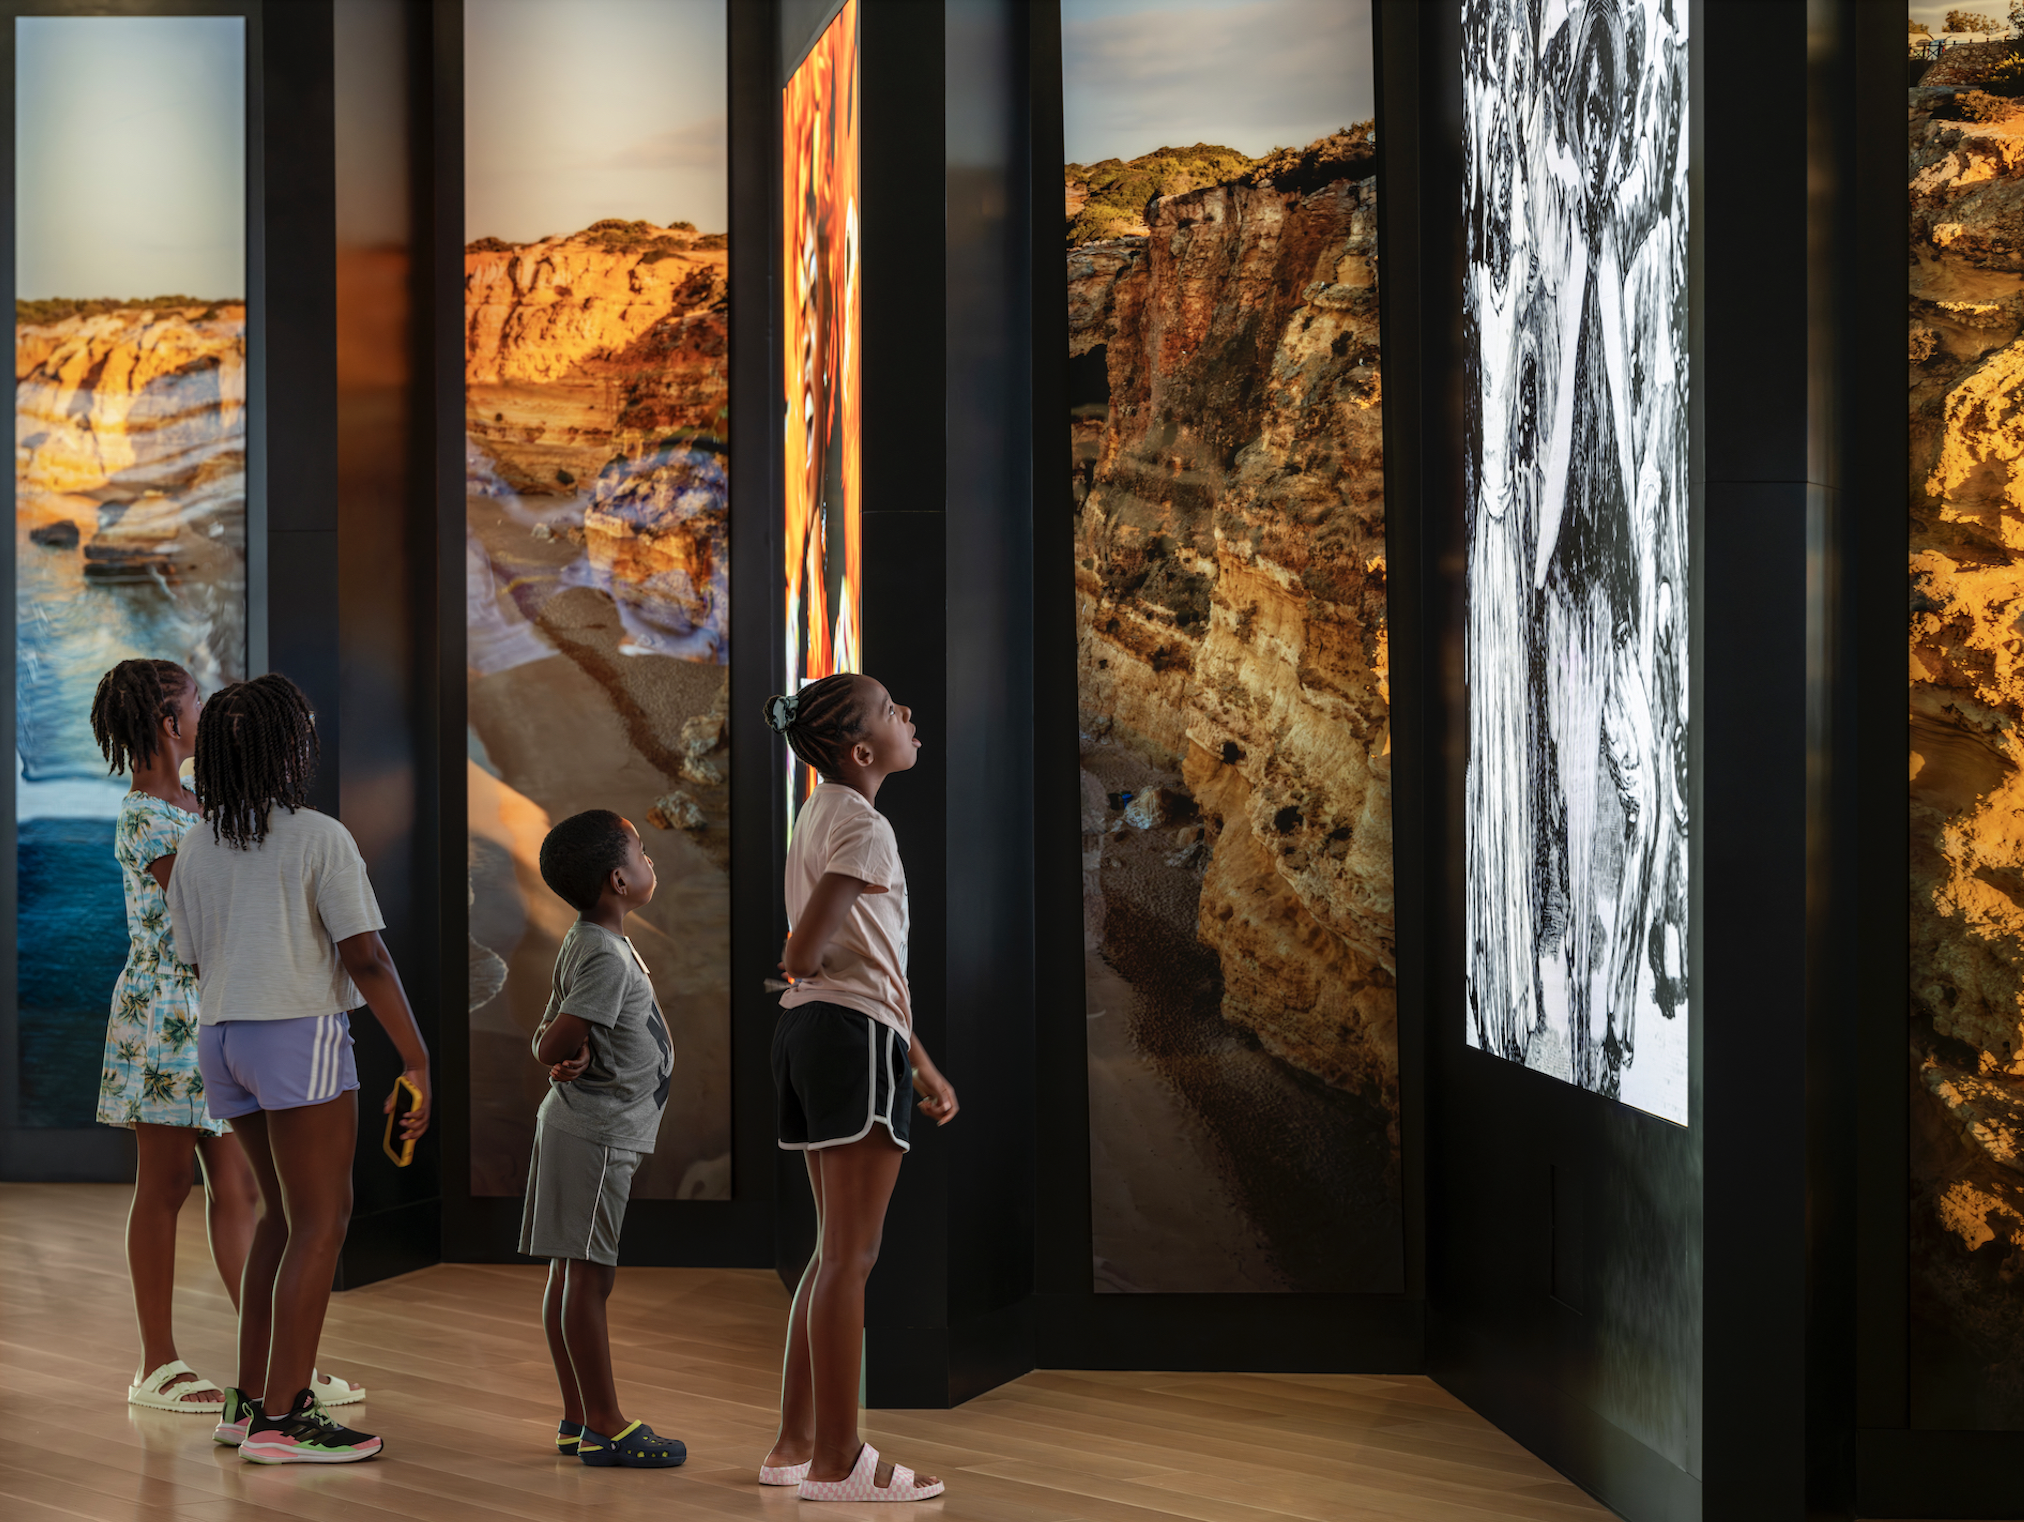  Throughout the museum, details of the African American experience come to life through historical artifacts, artworks, and interactive exhibits. Photograph by Sahar Coston-Hardy; courtesy of the International African American Museum. 